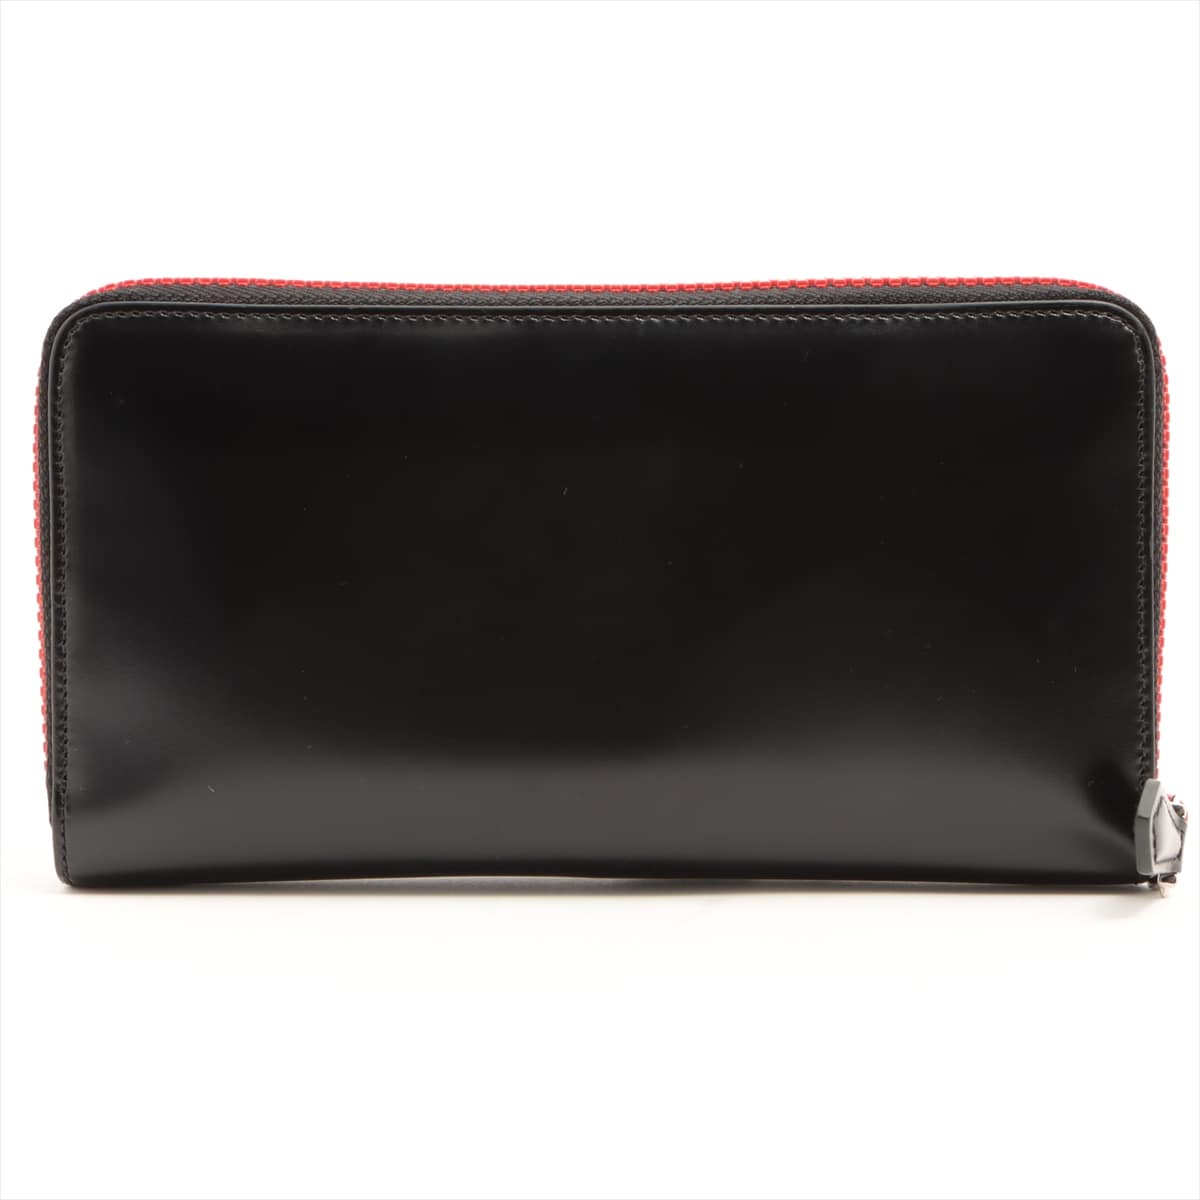 Givenchy Leather Round-Zip-Wallet Black